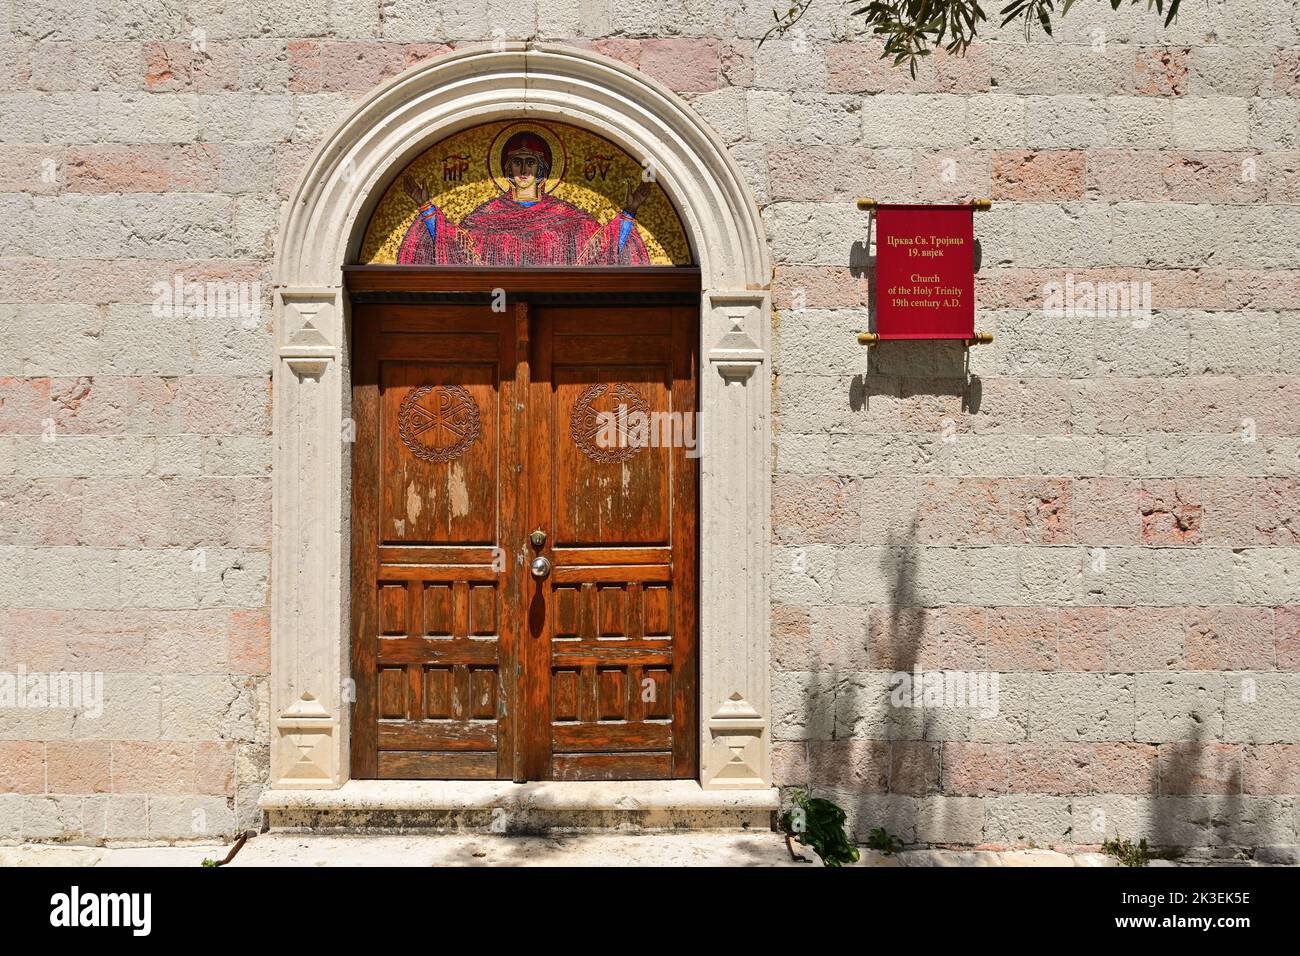 Doors to the church of the Holly Trinity in Budva Old Town. Montenegro Stock Photo